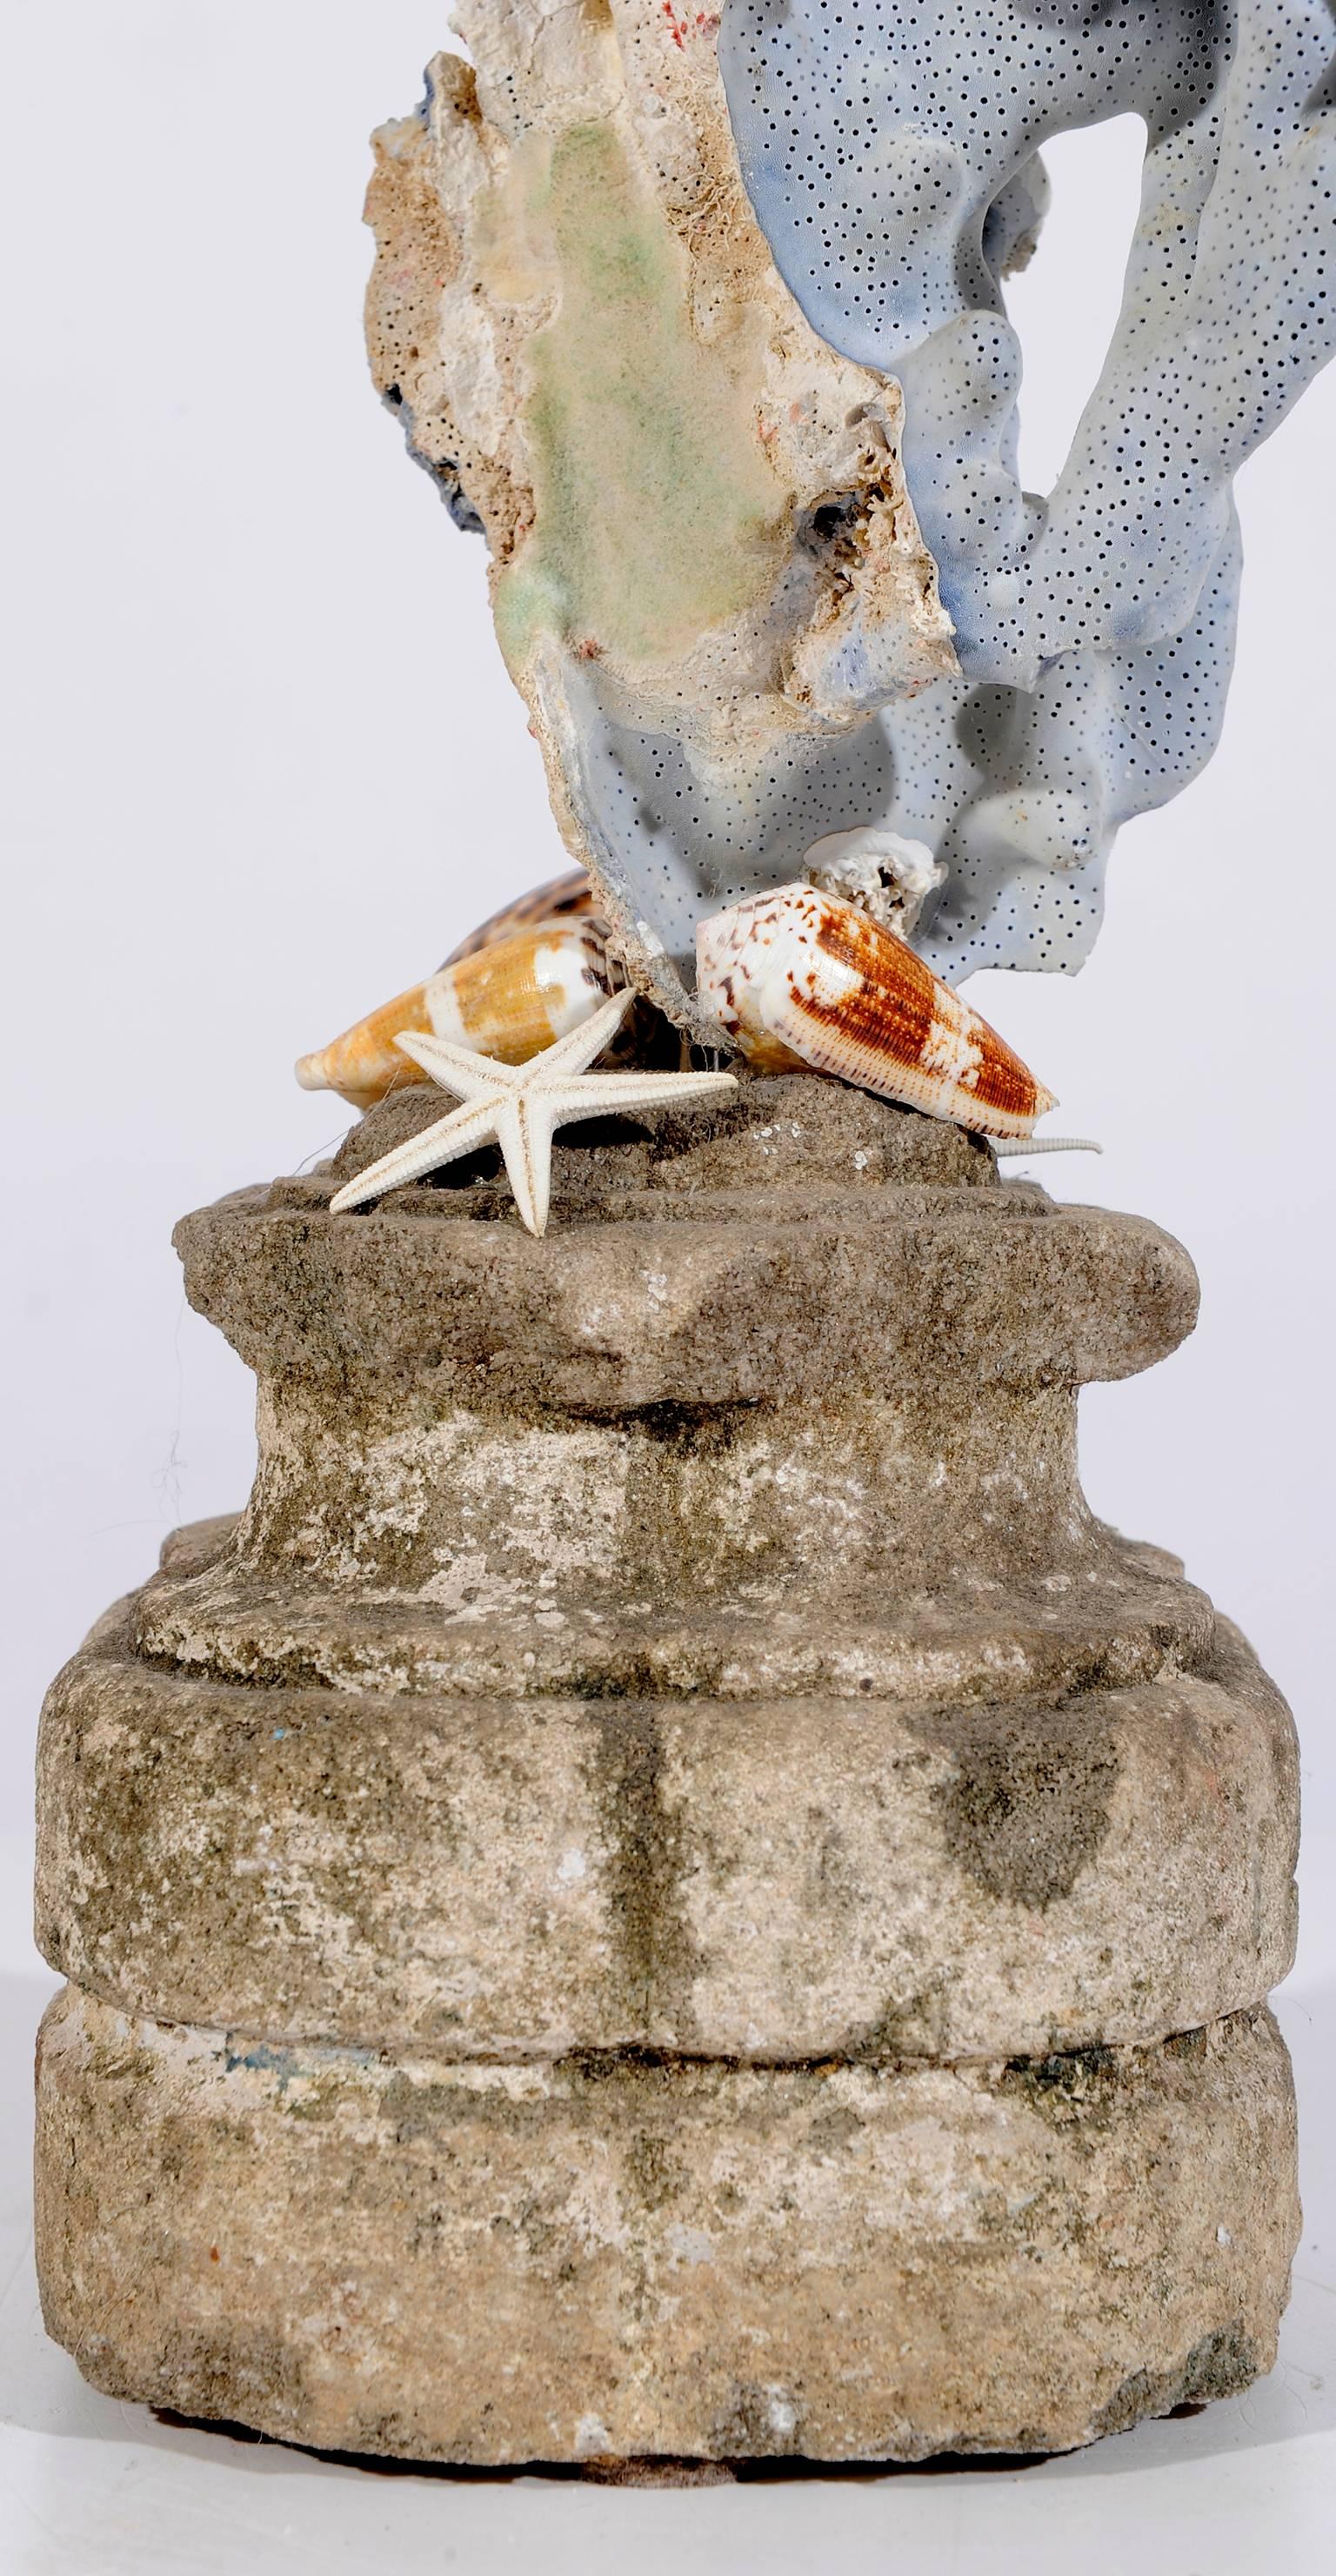 For Your sea house : perfect this Blue Coral  madrepora mounted like a natural sculpture on an ancient stone capital, completed with some shells.
O/7895.